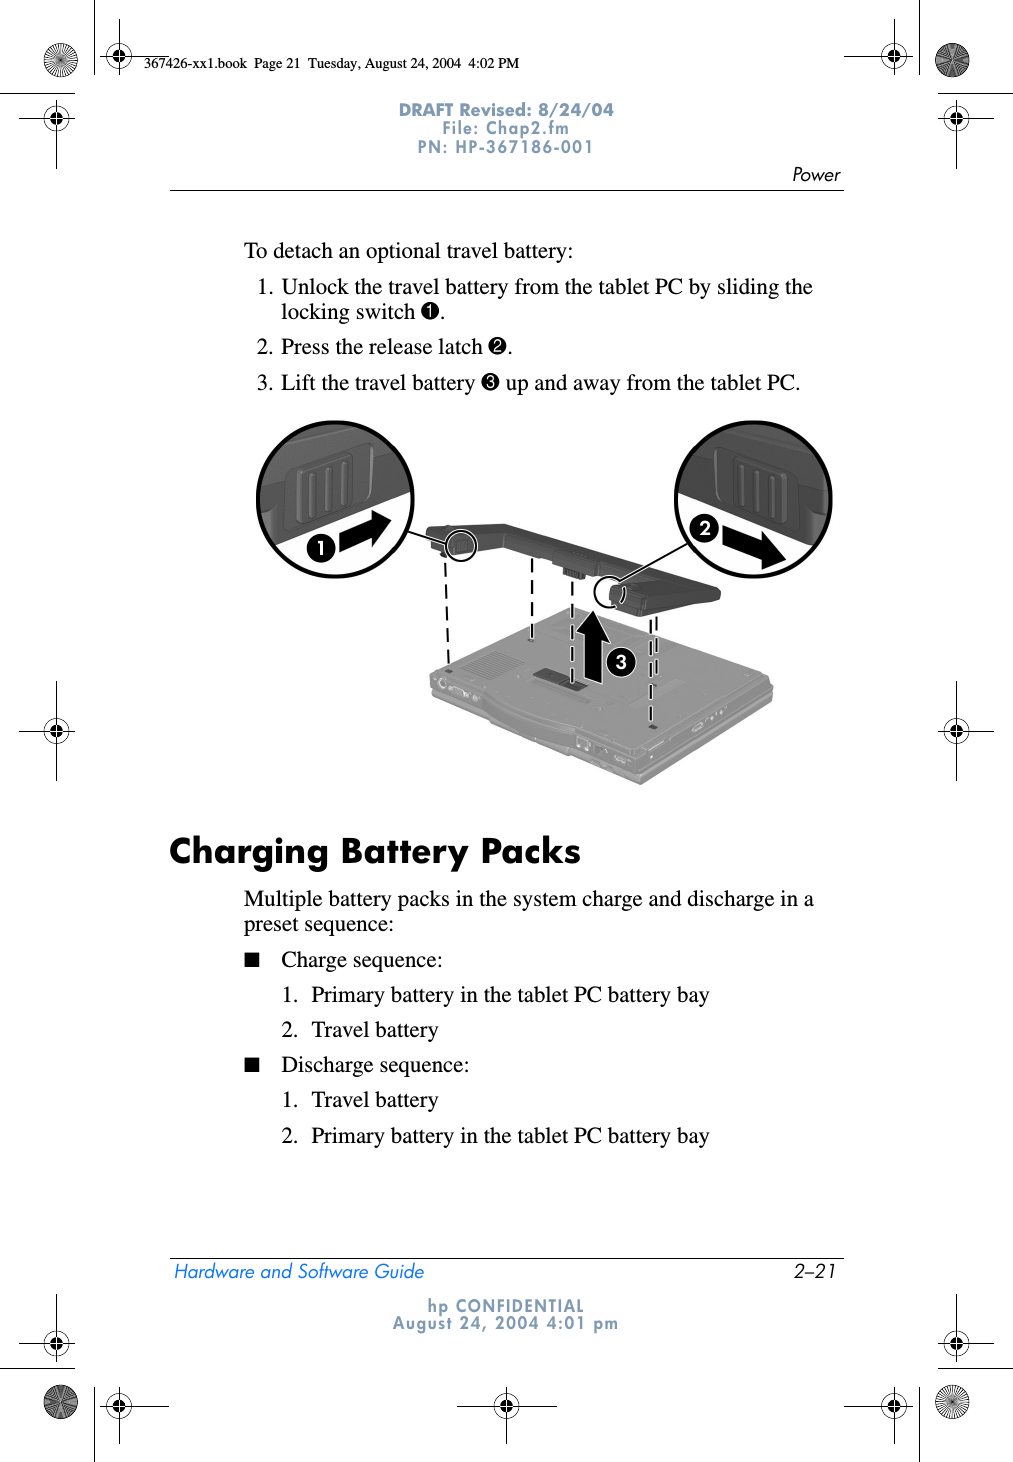 PowerHardware and Software Guide 2–21DRAFT Revised: 8/24/04File: Chap2.fm PN: HP-367186-001 hp CONFIDENTIALAugust 24, 2004 4:01 pmTo detach an optional travel battery:1. Unlock the travel battery from the tablet PC by sliding the locking switch 1.2. Press the release latch 2.3. Lift the travel battery 3 up and away from the tablet PC.Charging Battery PacksMultiple battery packs in the system charge and discharge in a preset sequence:■Charge sequence:1. Primary battery in the tablet PC battery bay2. Travel battery■Discharge sequence:1. Travel battery2. Primary battery in the tablet PC battery bay367426-xx1.book  Page 21  Tuesday, August 24, 2004  4:02 PM